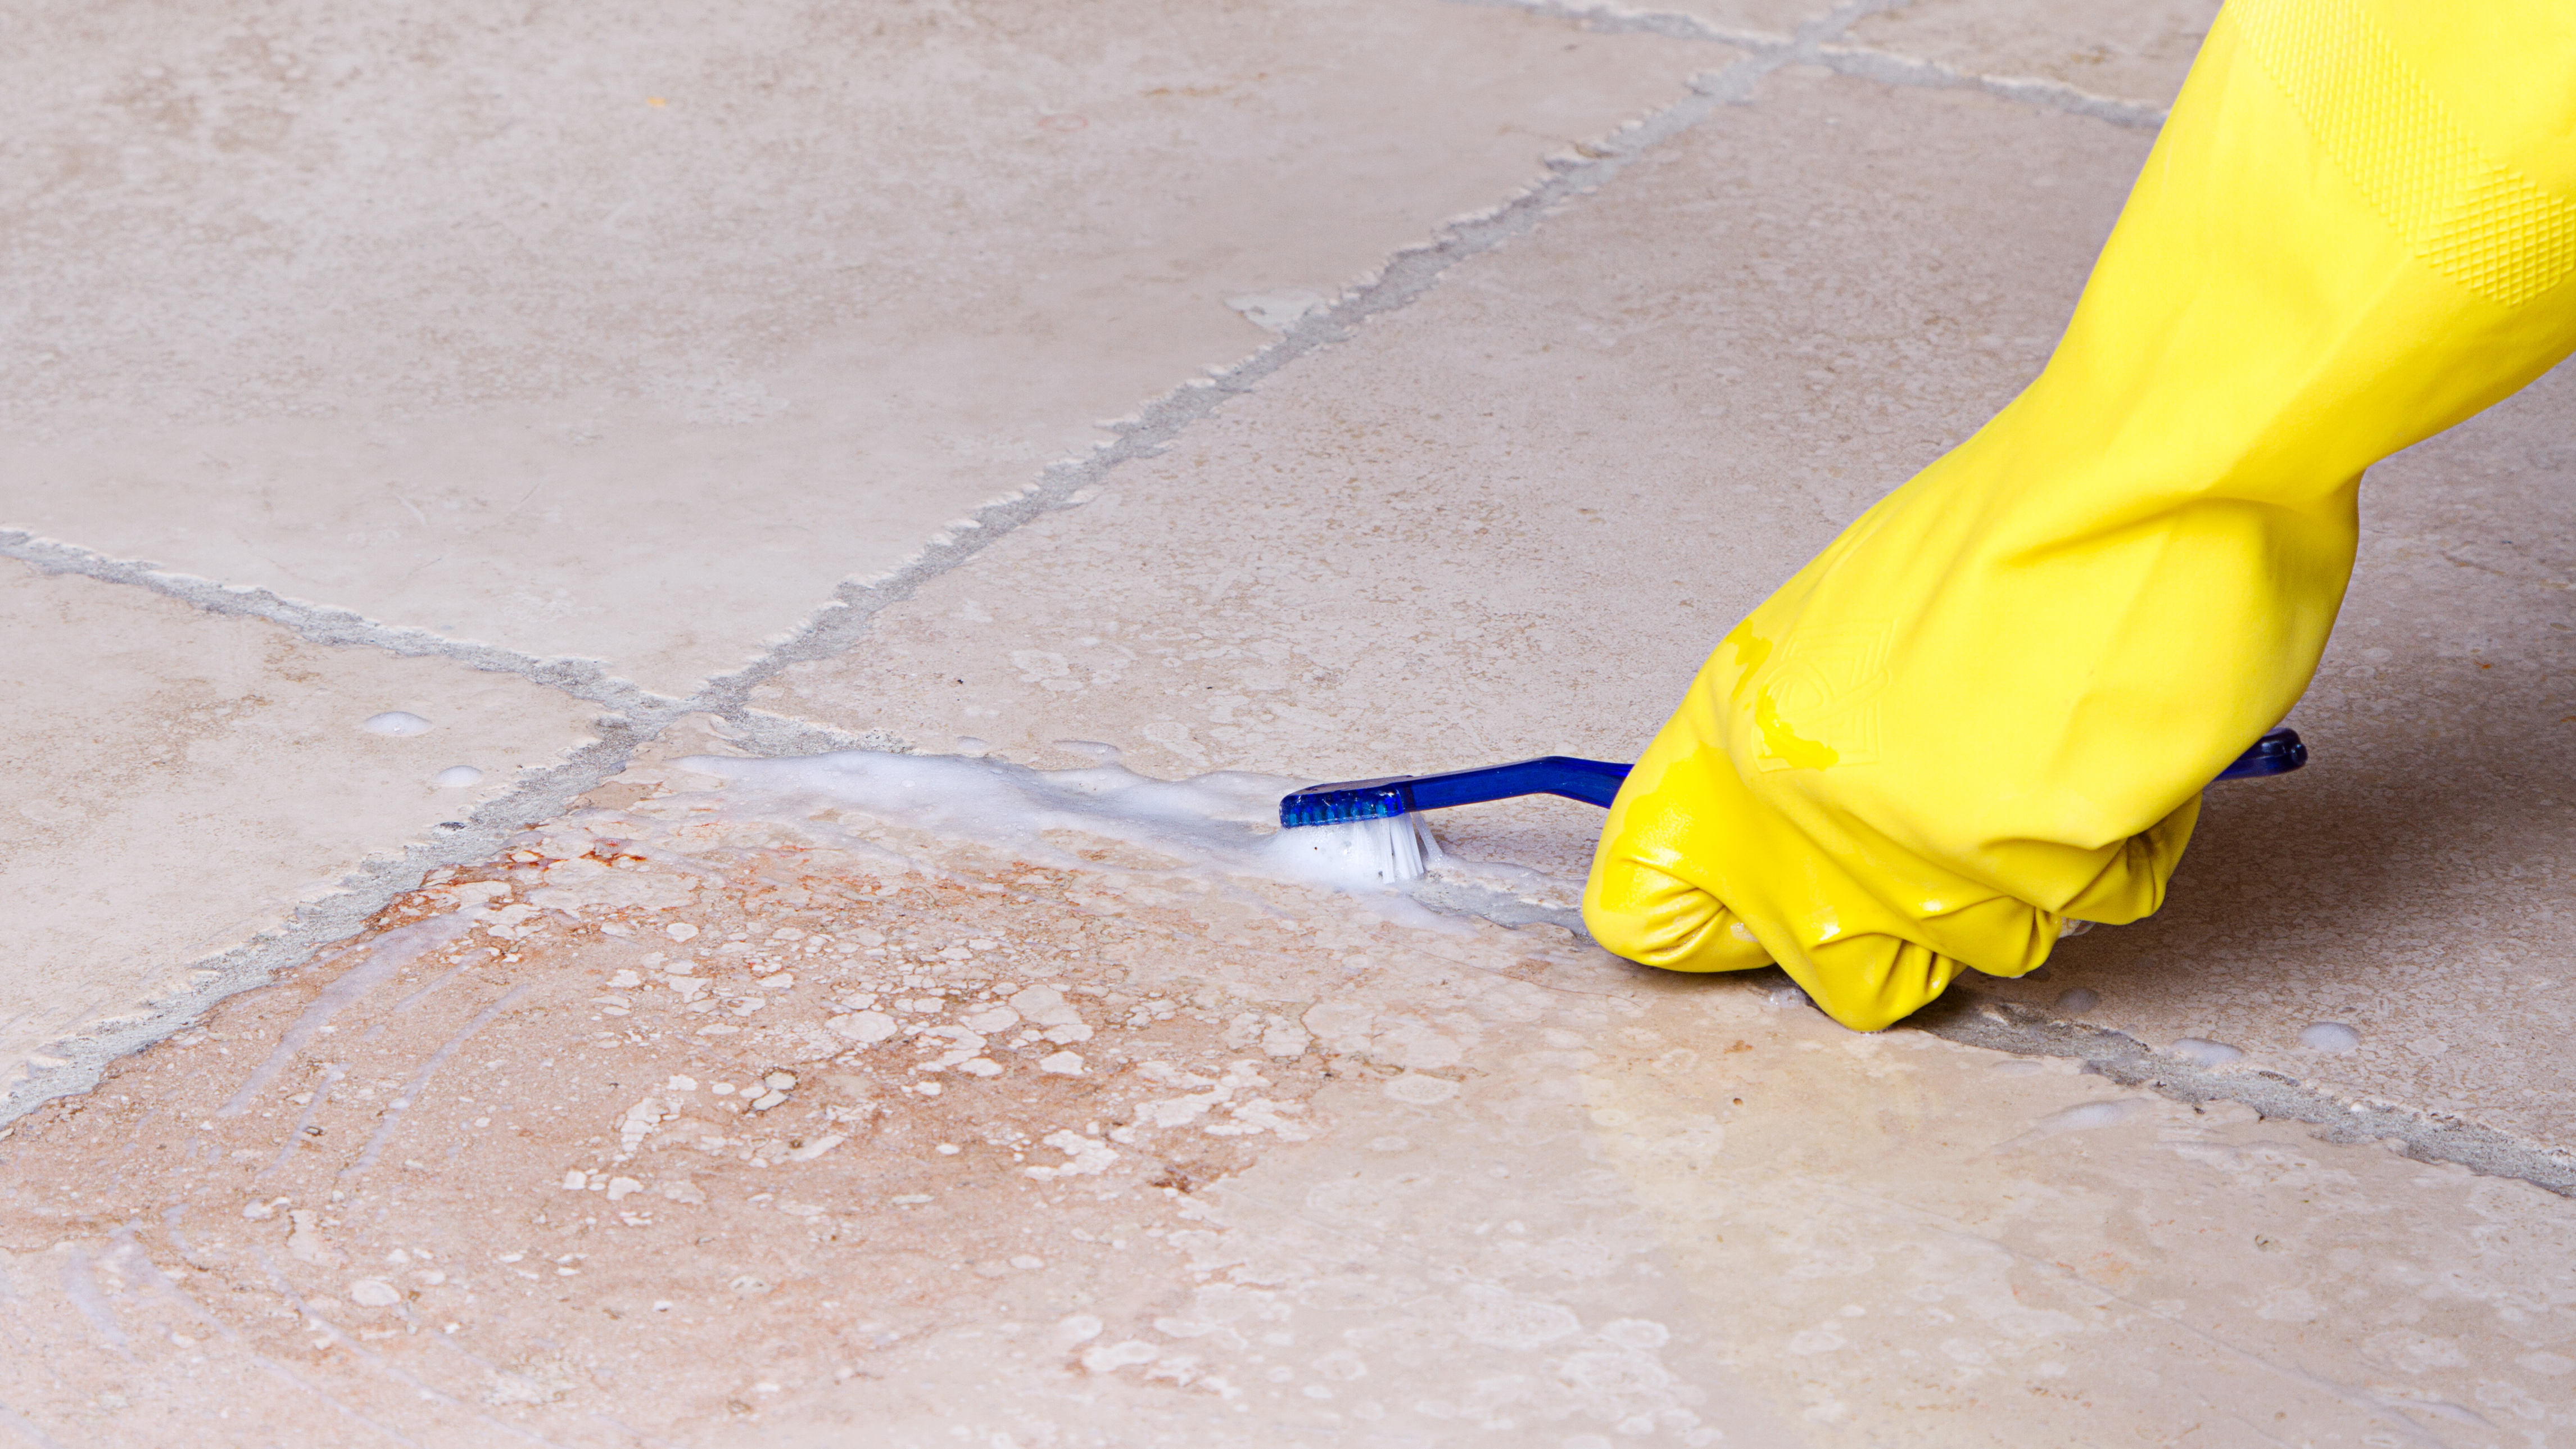 How To Clean Grout On Floor Tiles, How To Remove Grout Stains From Hardwood Floor